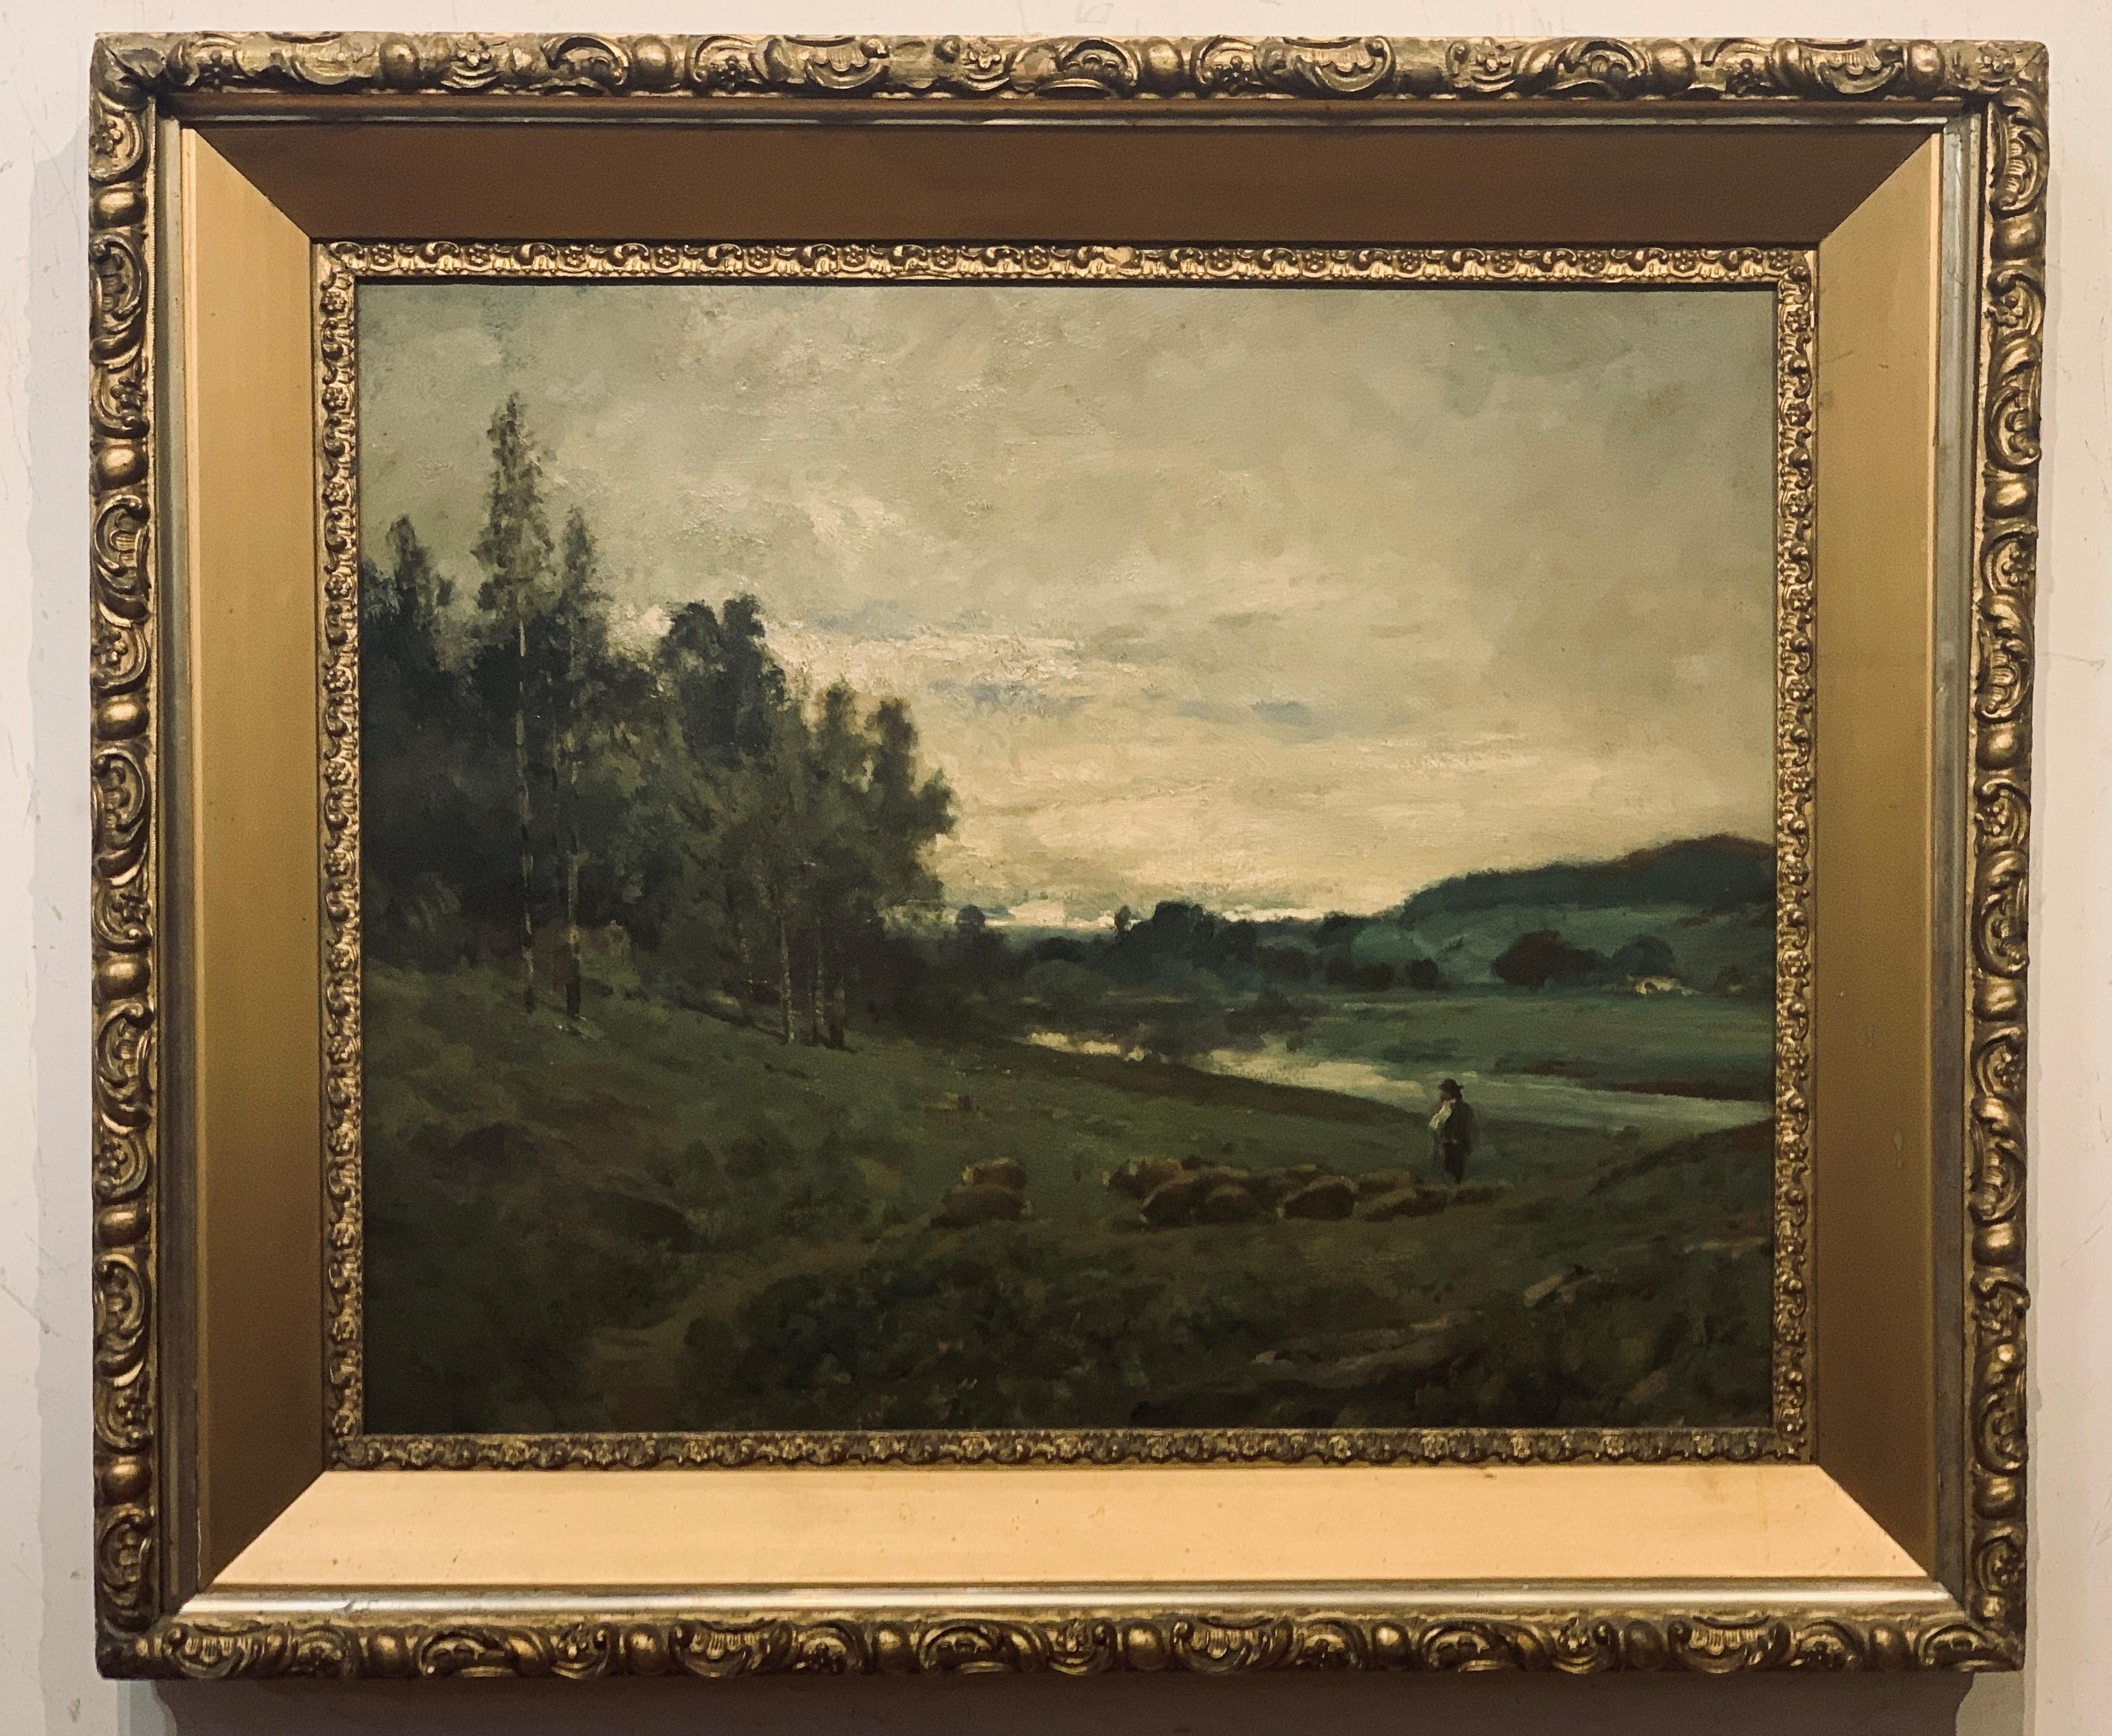 Unknown Landscape Painting - American Barbizon Landscape, New England about 1890  Shepherd and Sheep 